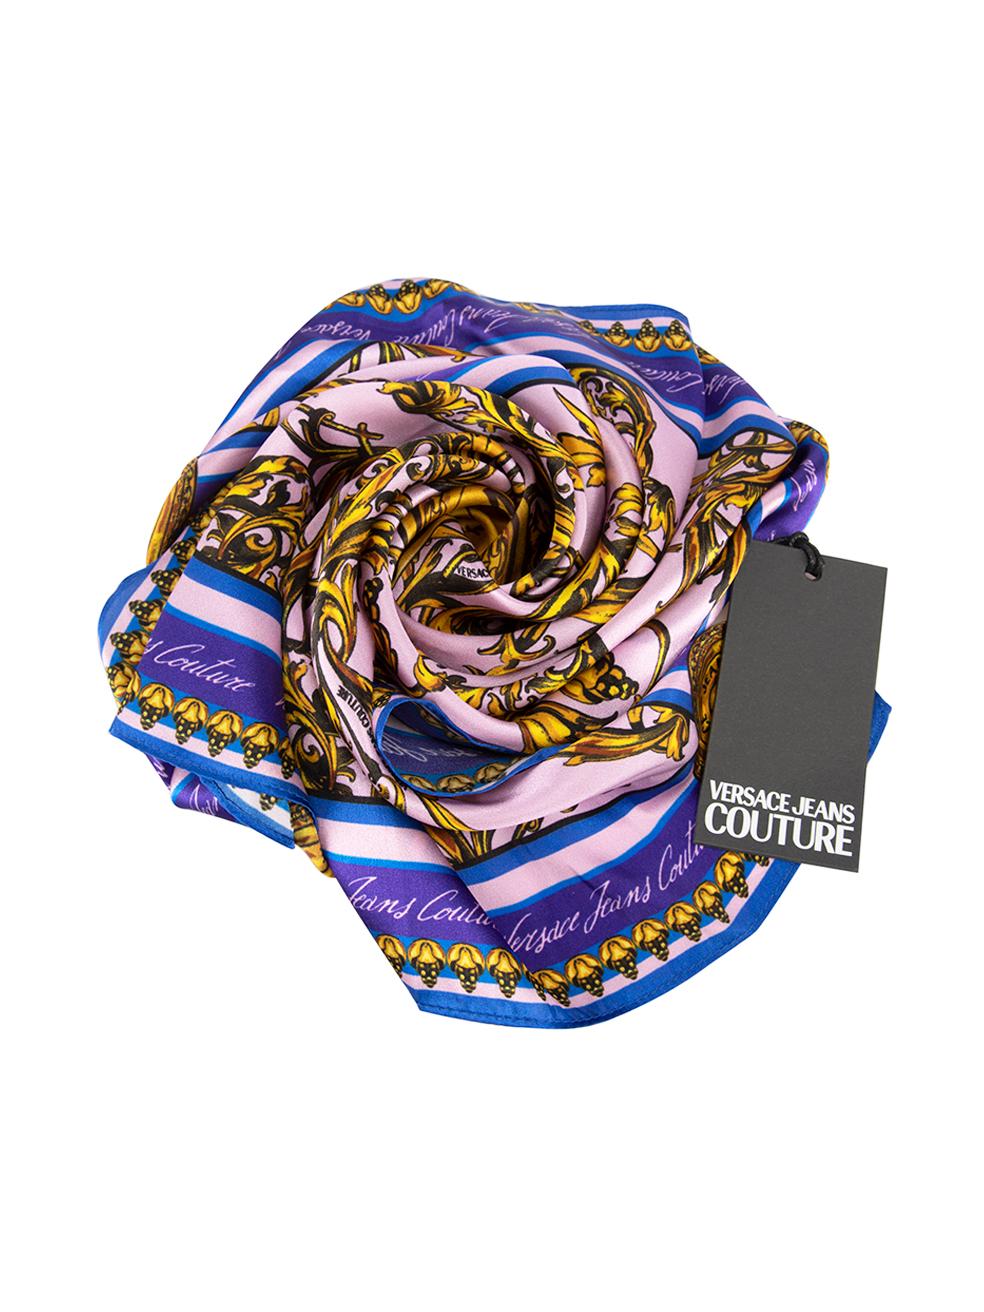 CONDITION is Never worn, with tags. No visible wear to scarf is evident on this new Versace Jeans Couture designer resale item.



Details


Multicolour

Silk

Scarf

Baroque pattern

Square



 

Made in China 

 

Composition

100% Silk

Size &